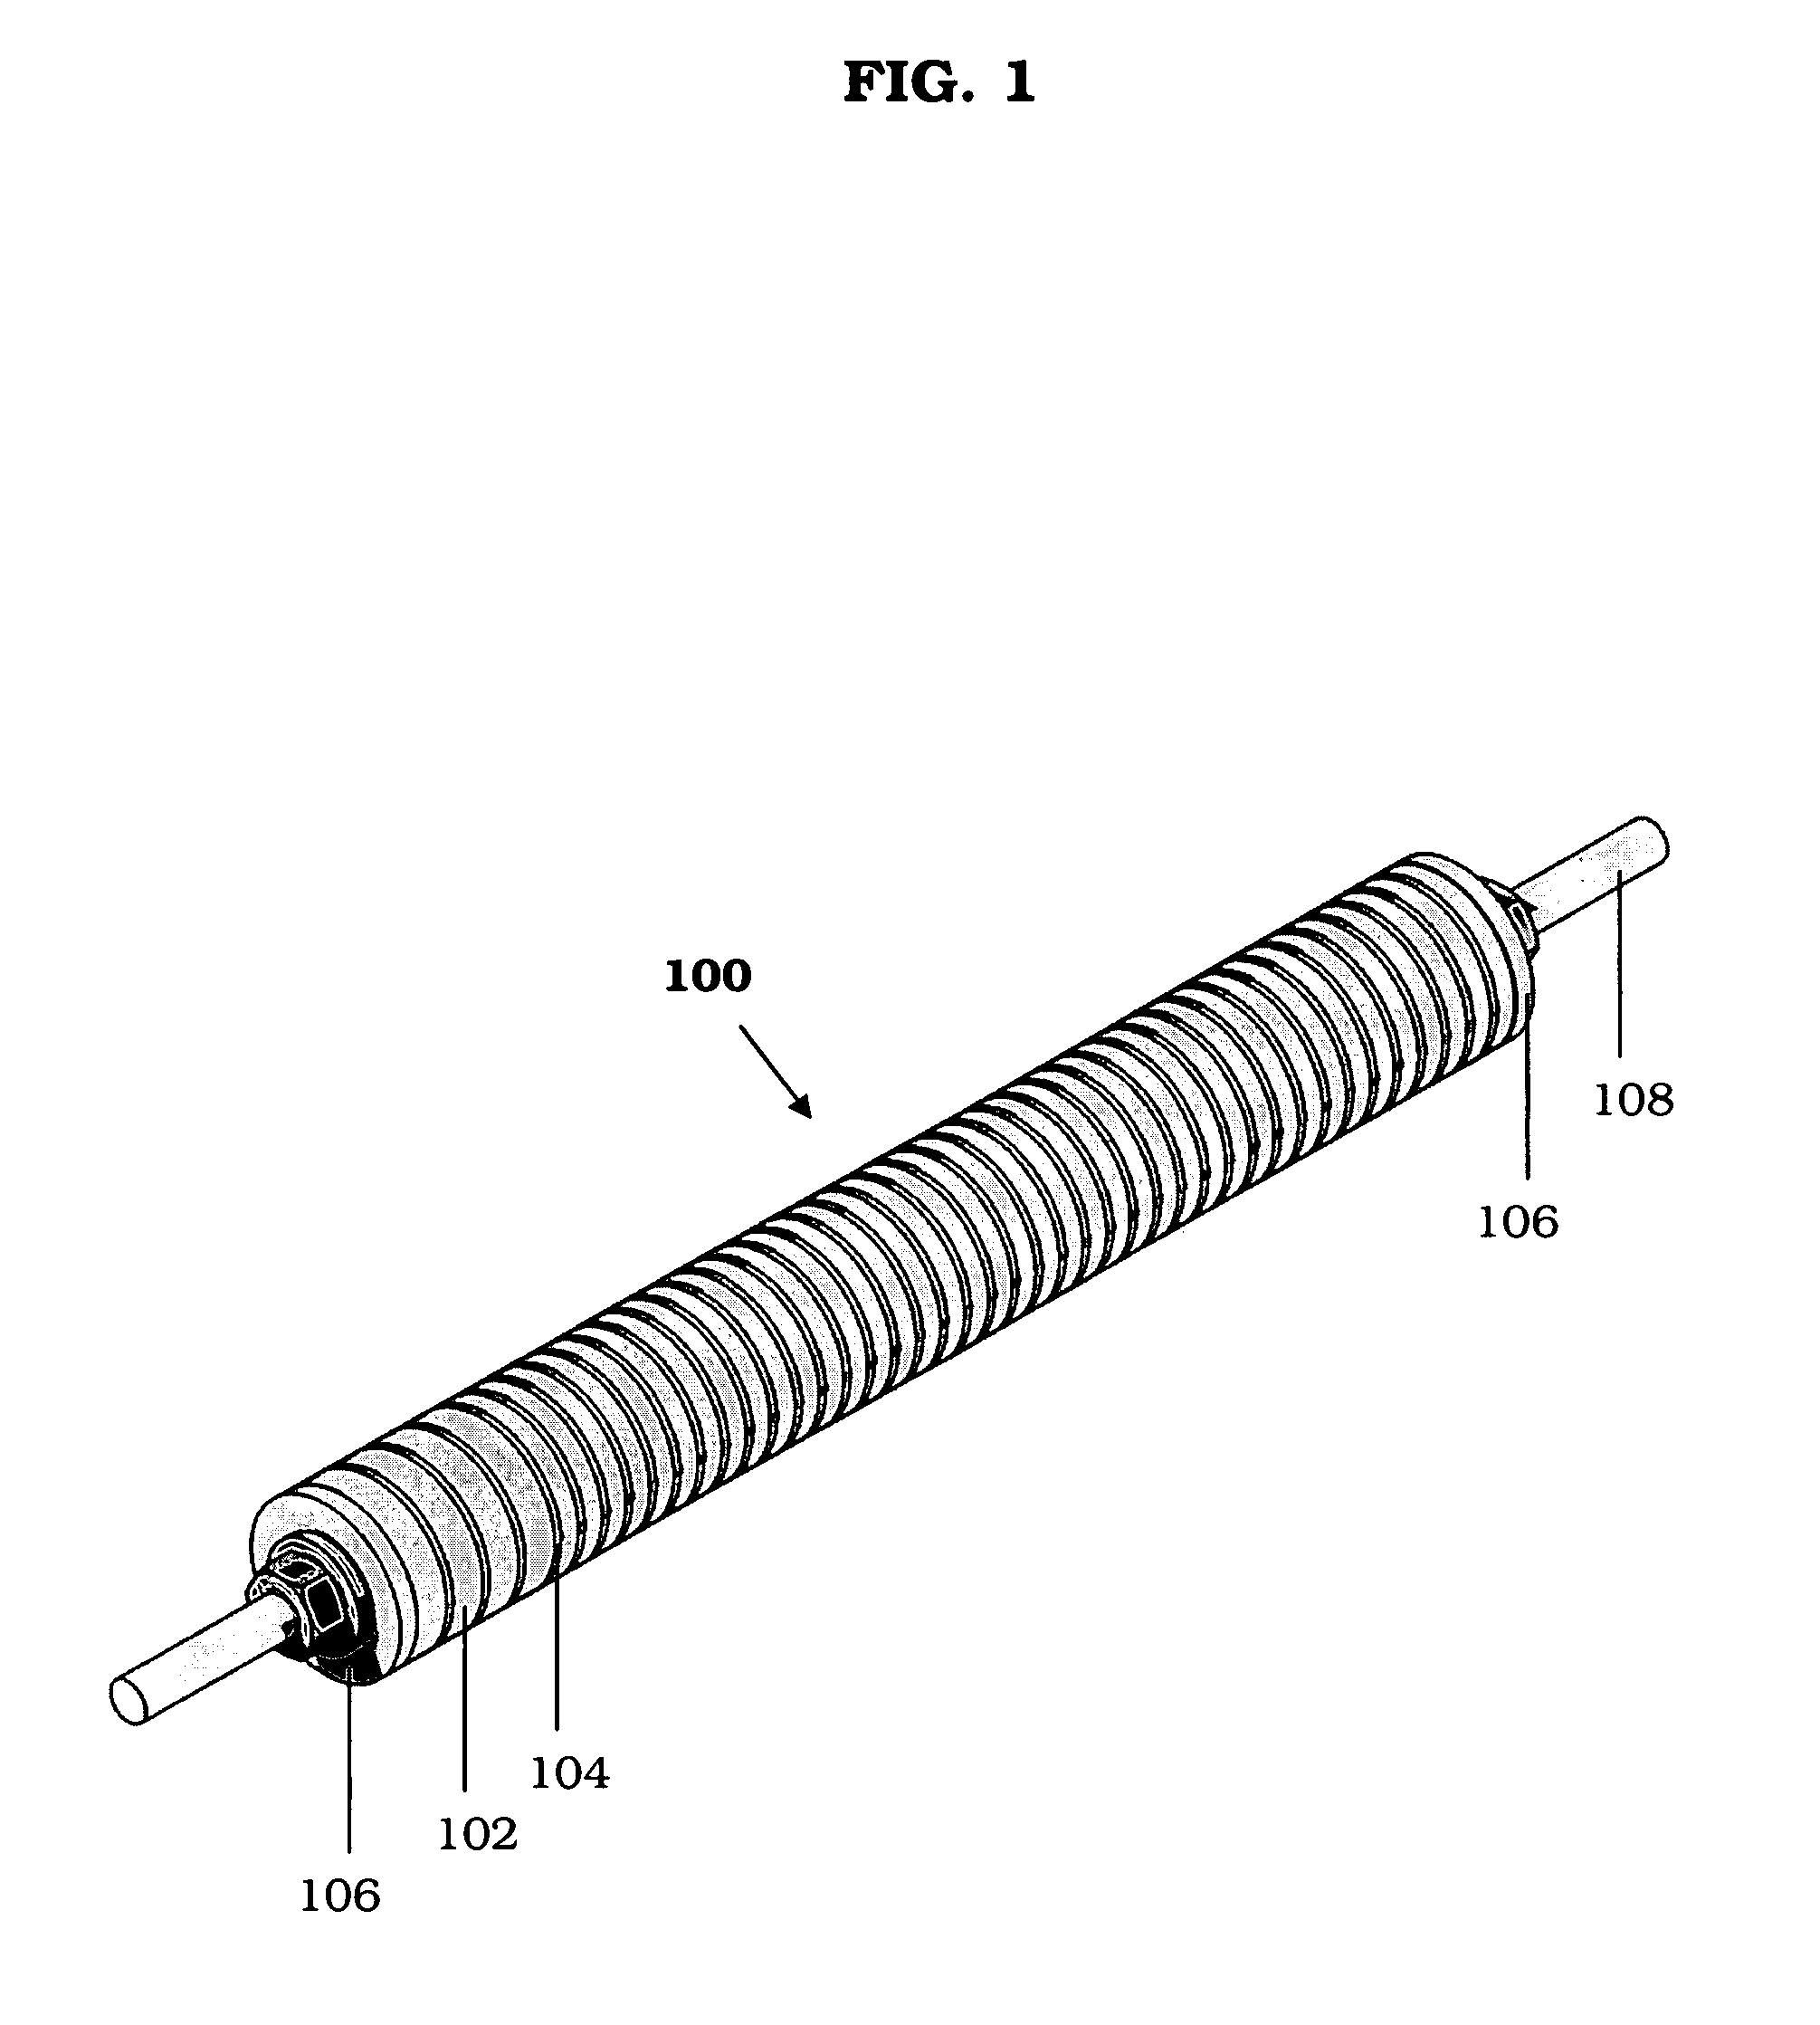 Brachytherapy and radiography target holding device